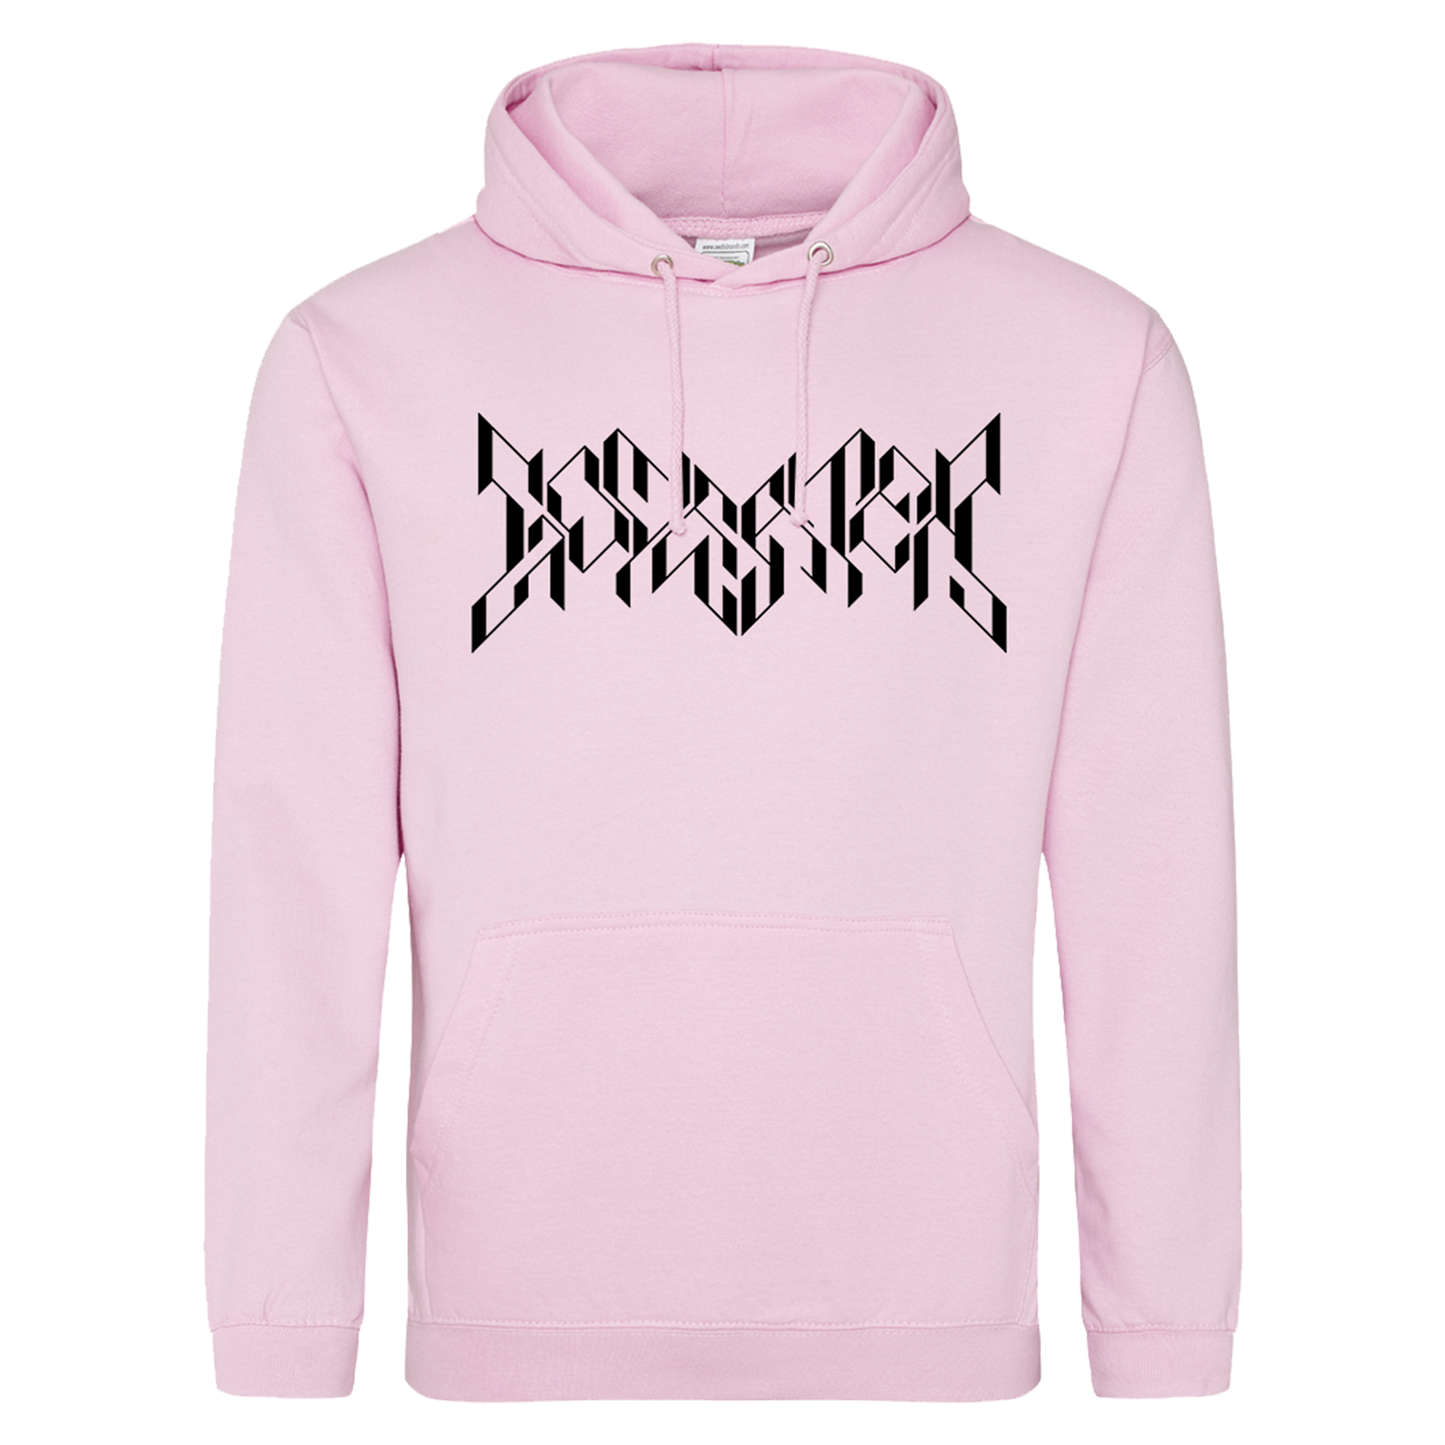 The Godeater Hoodie 3.0